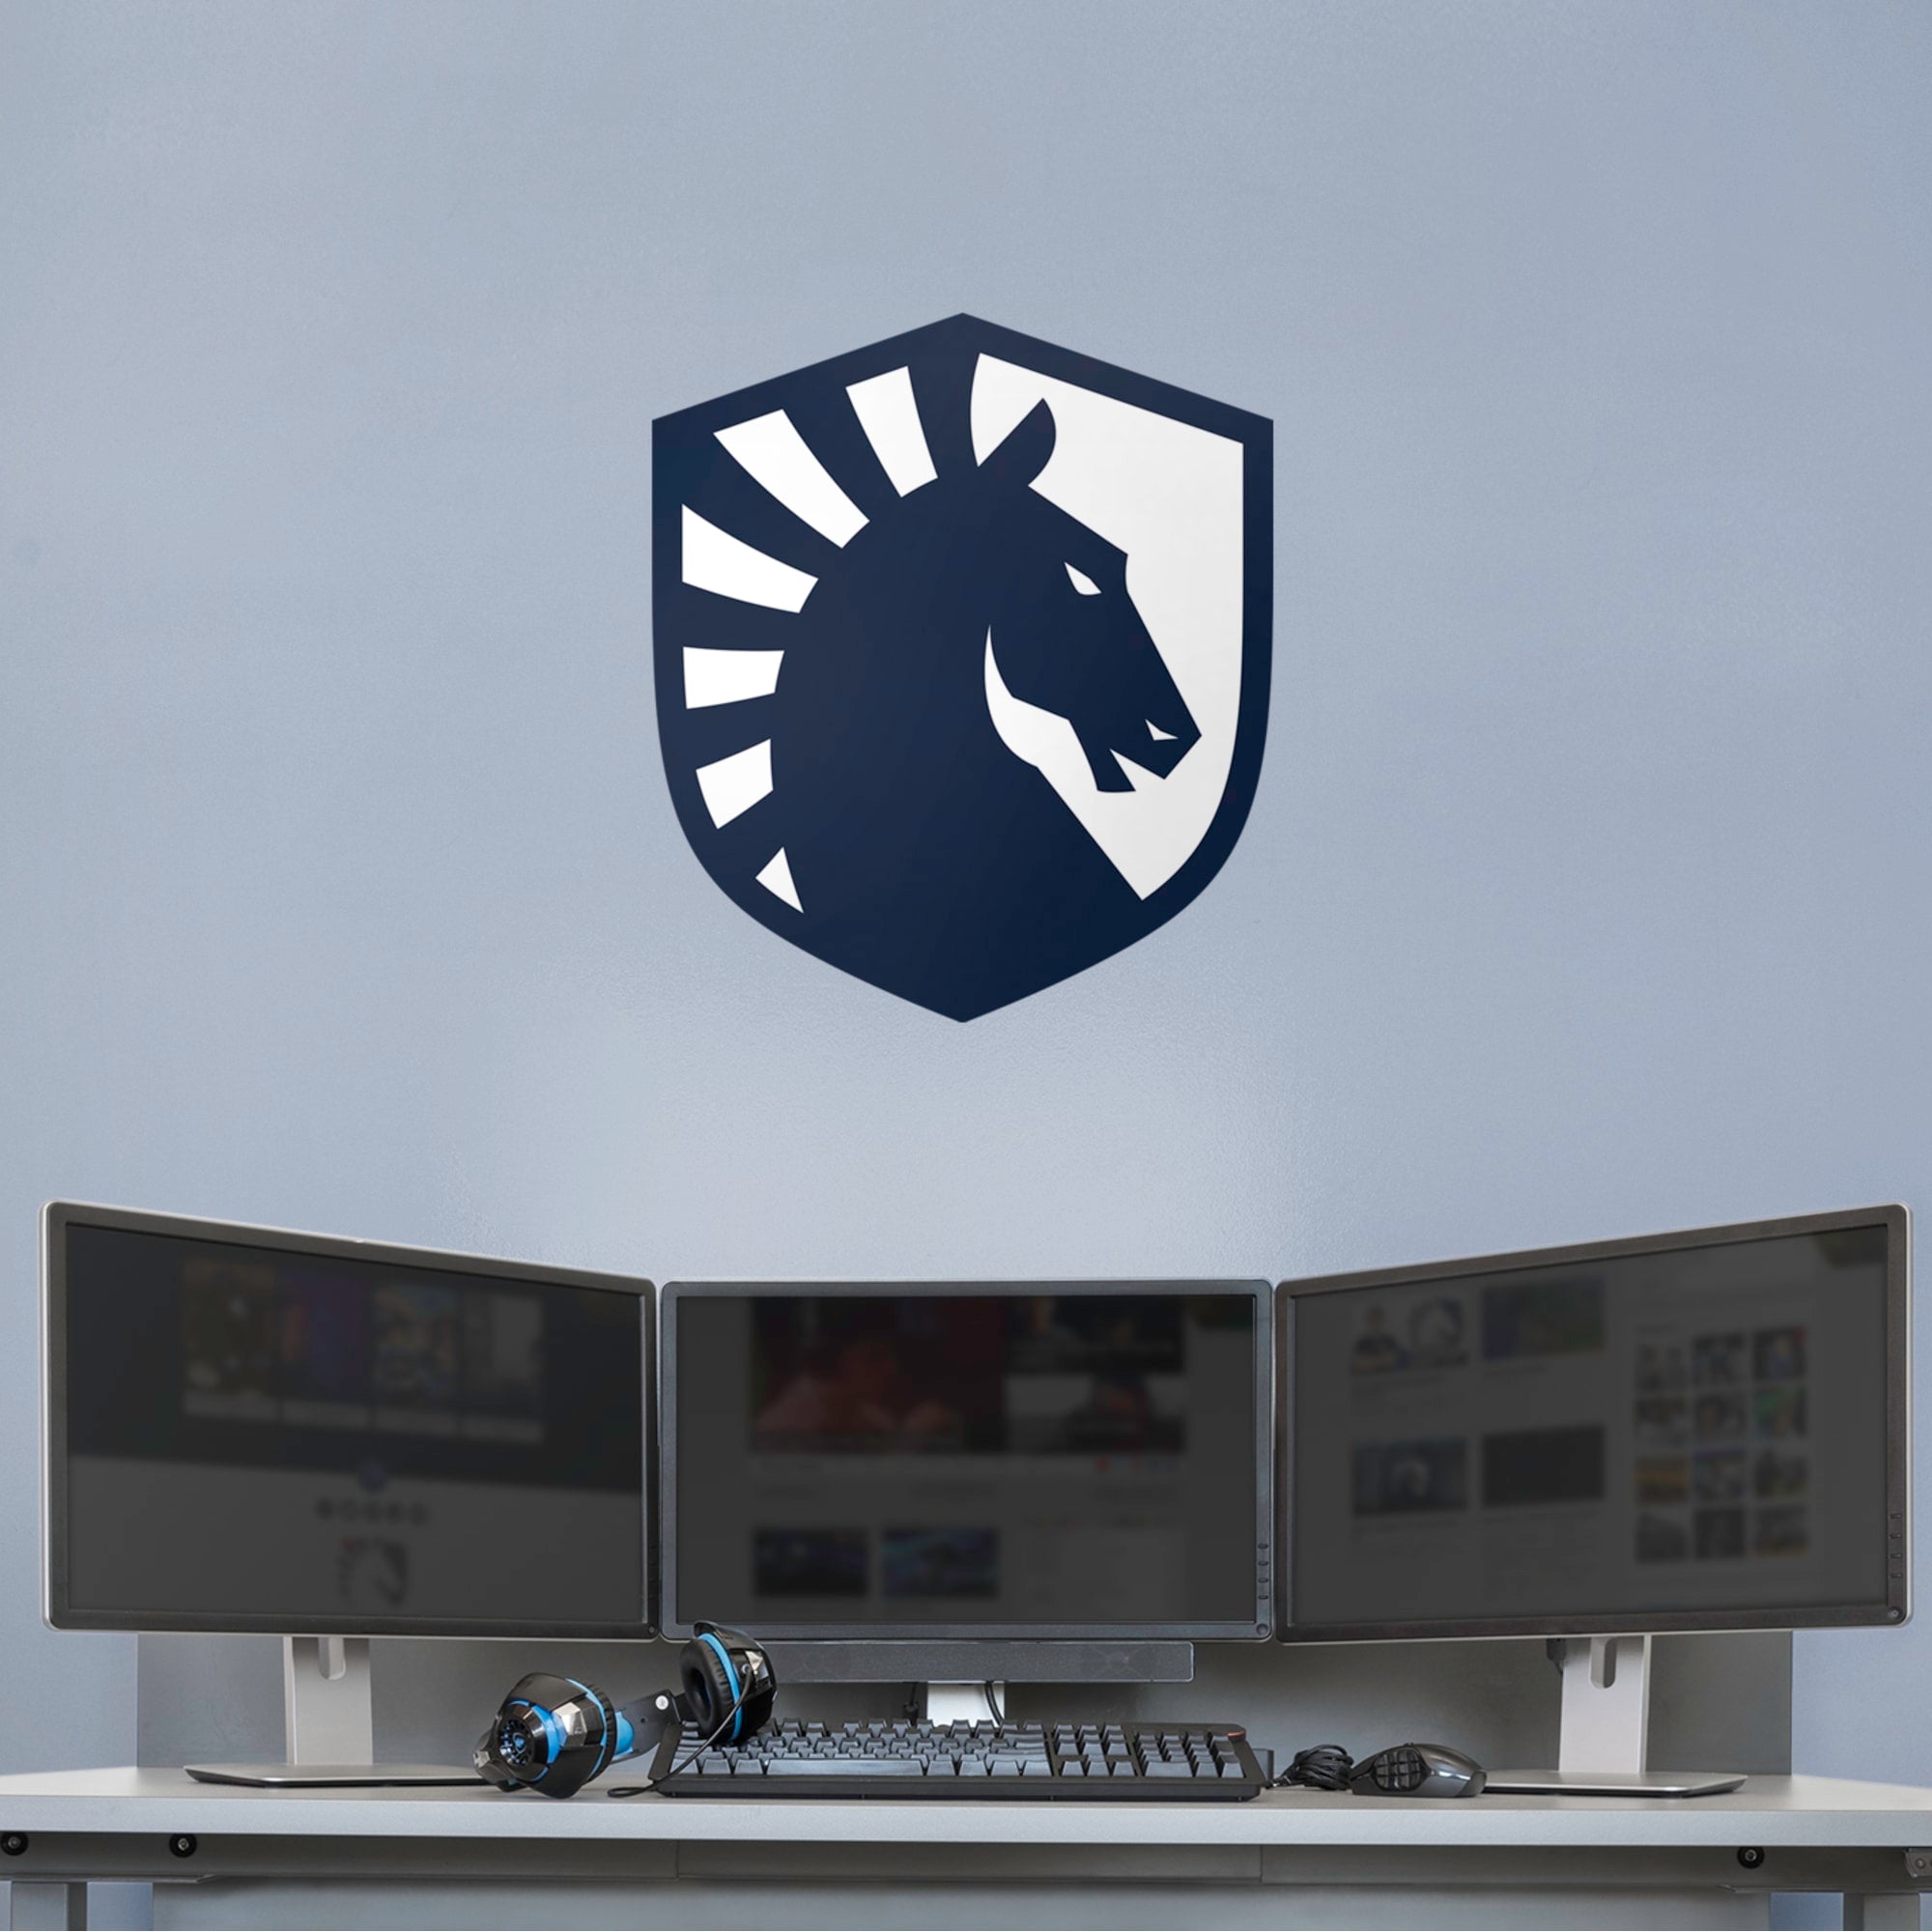 Team Liquid: Logo - Officially Licensed Removable Wall Decal 25.0"W x 29.0"H by Fathead | Vinyl